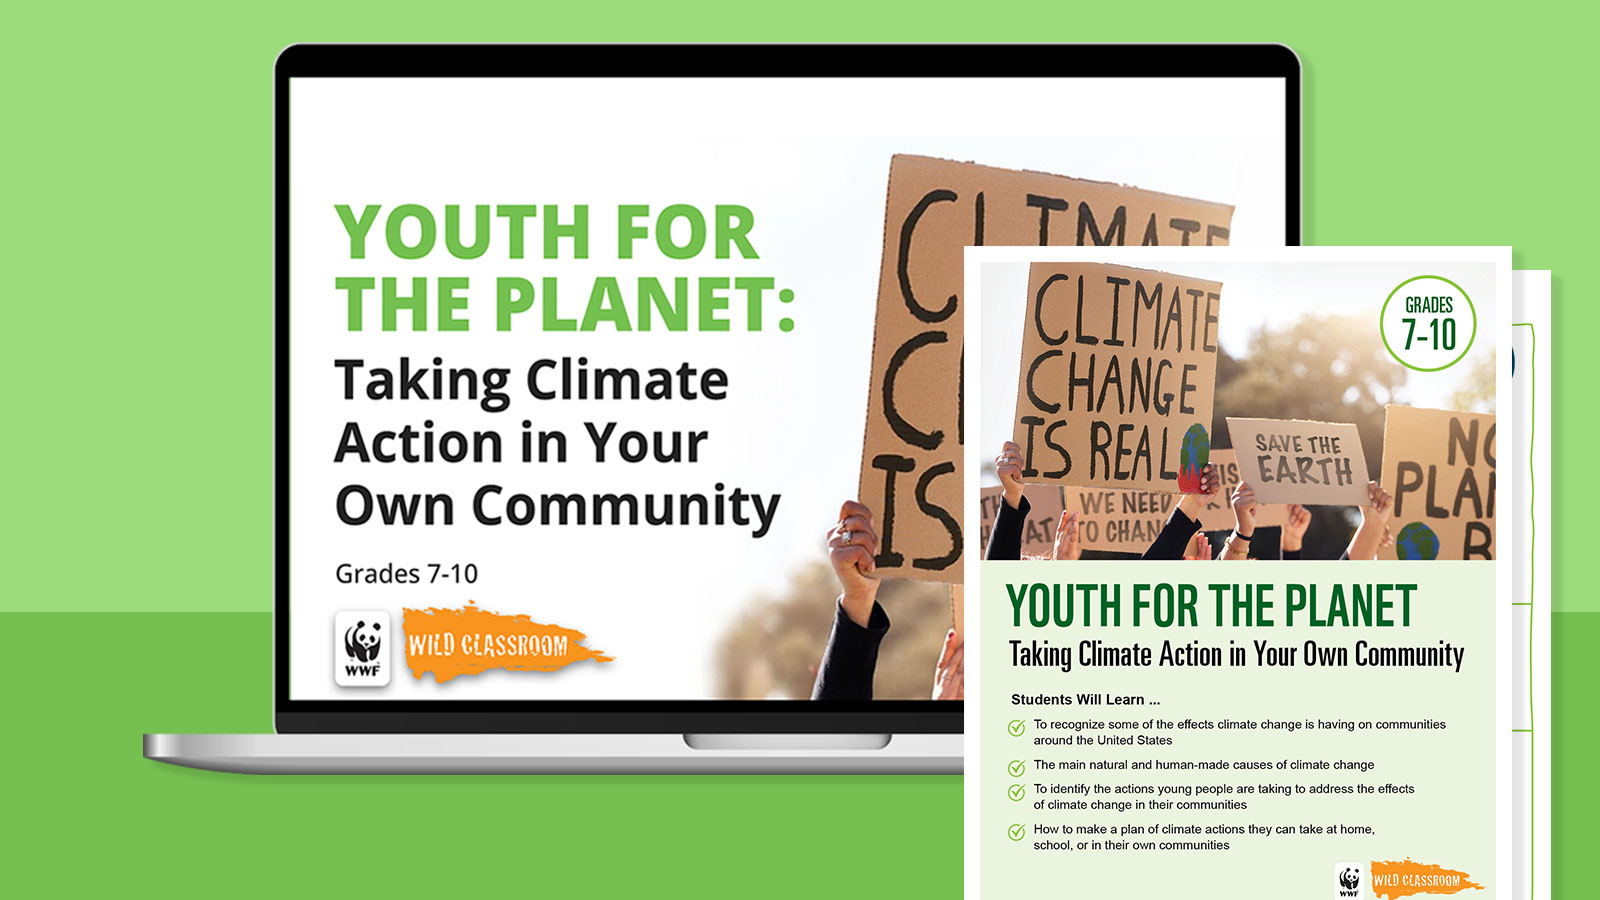 Feature image for the Youth For the Planet: Taking Climate Action in Your Own Community lesson plan and activities